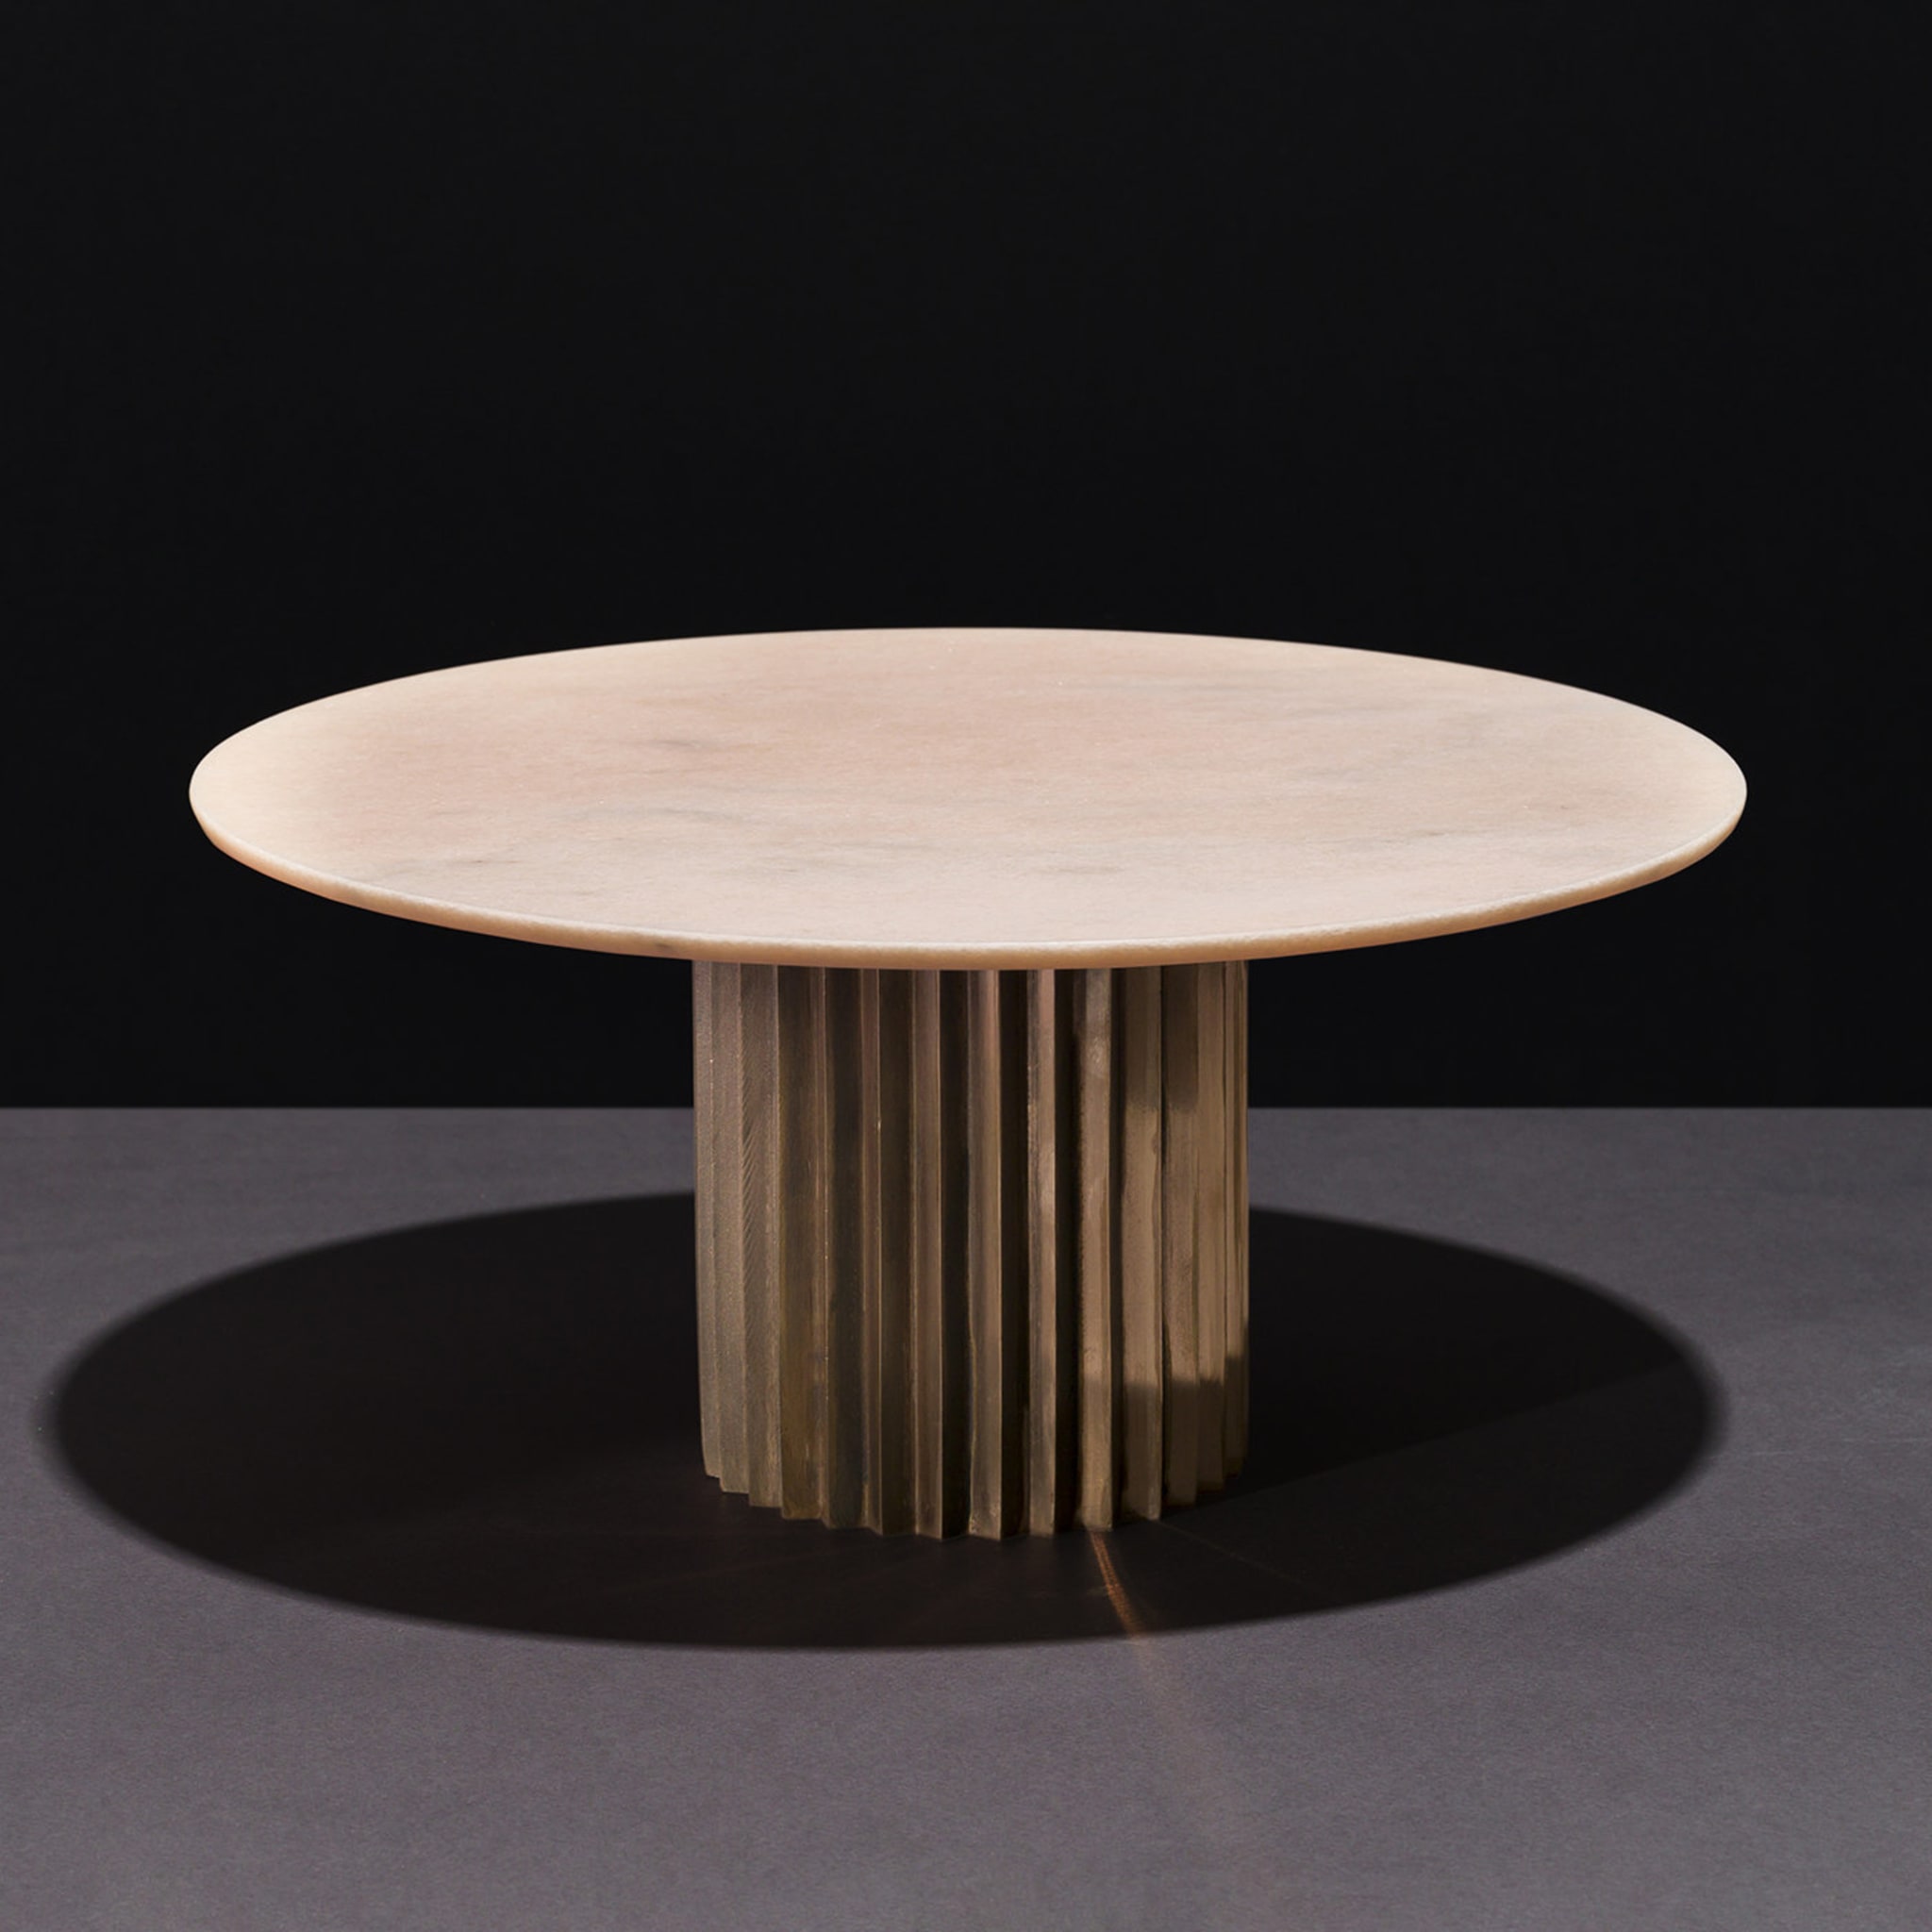 Doris Dining Table in Pink Marble and Bronze - Alternative view 1